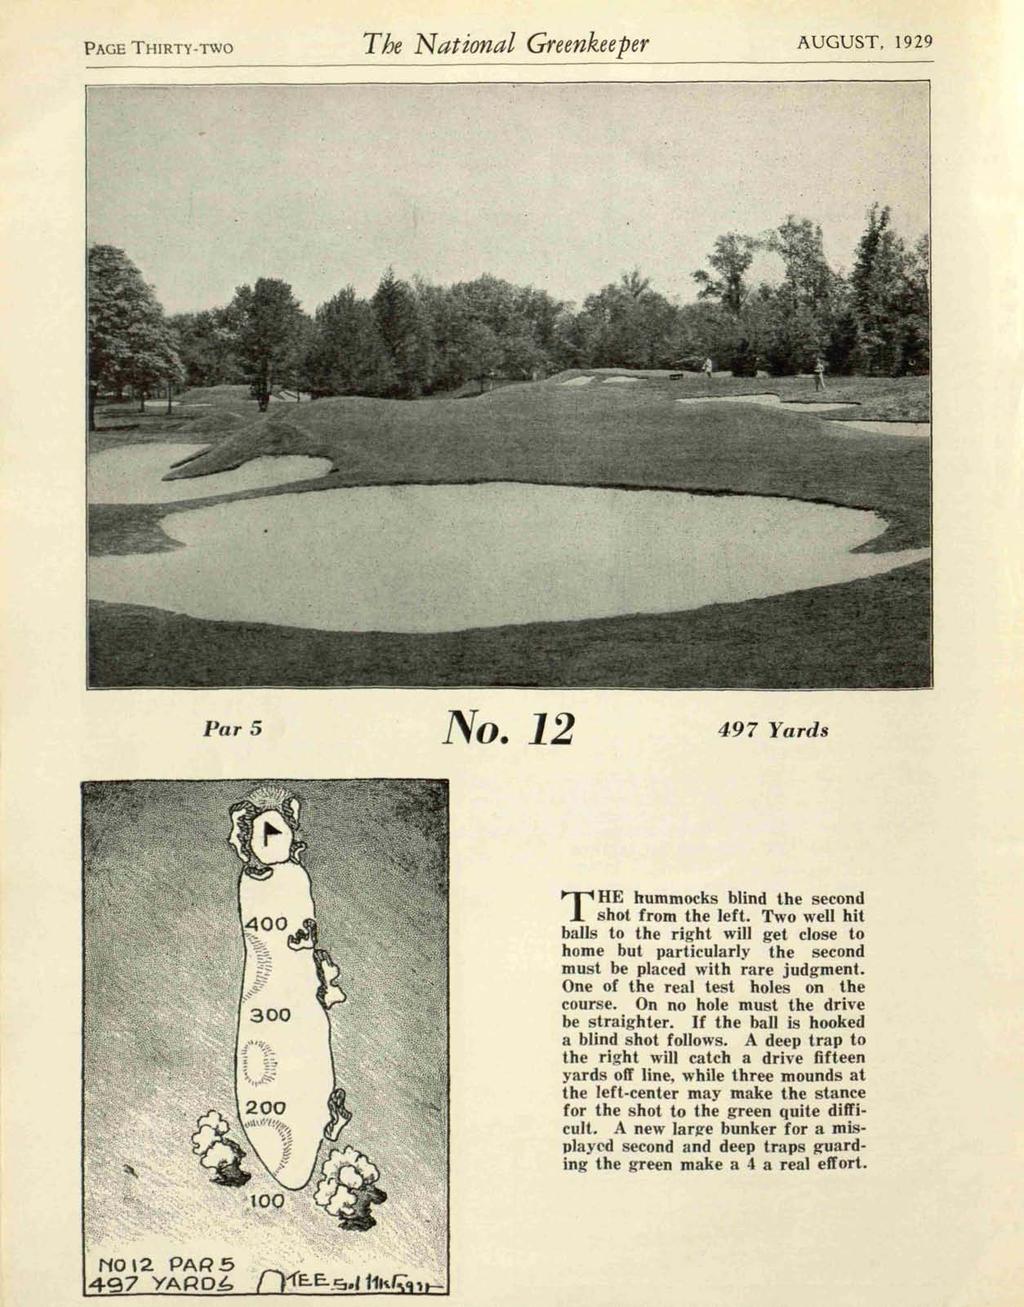 PAGE THIRTY-TWO The National Greenkeeper AUGUST, 1929 Par 5 No. 12 497 Yards T HE hummocks blind the second shot from the left.